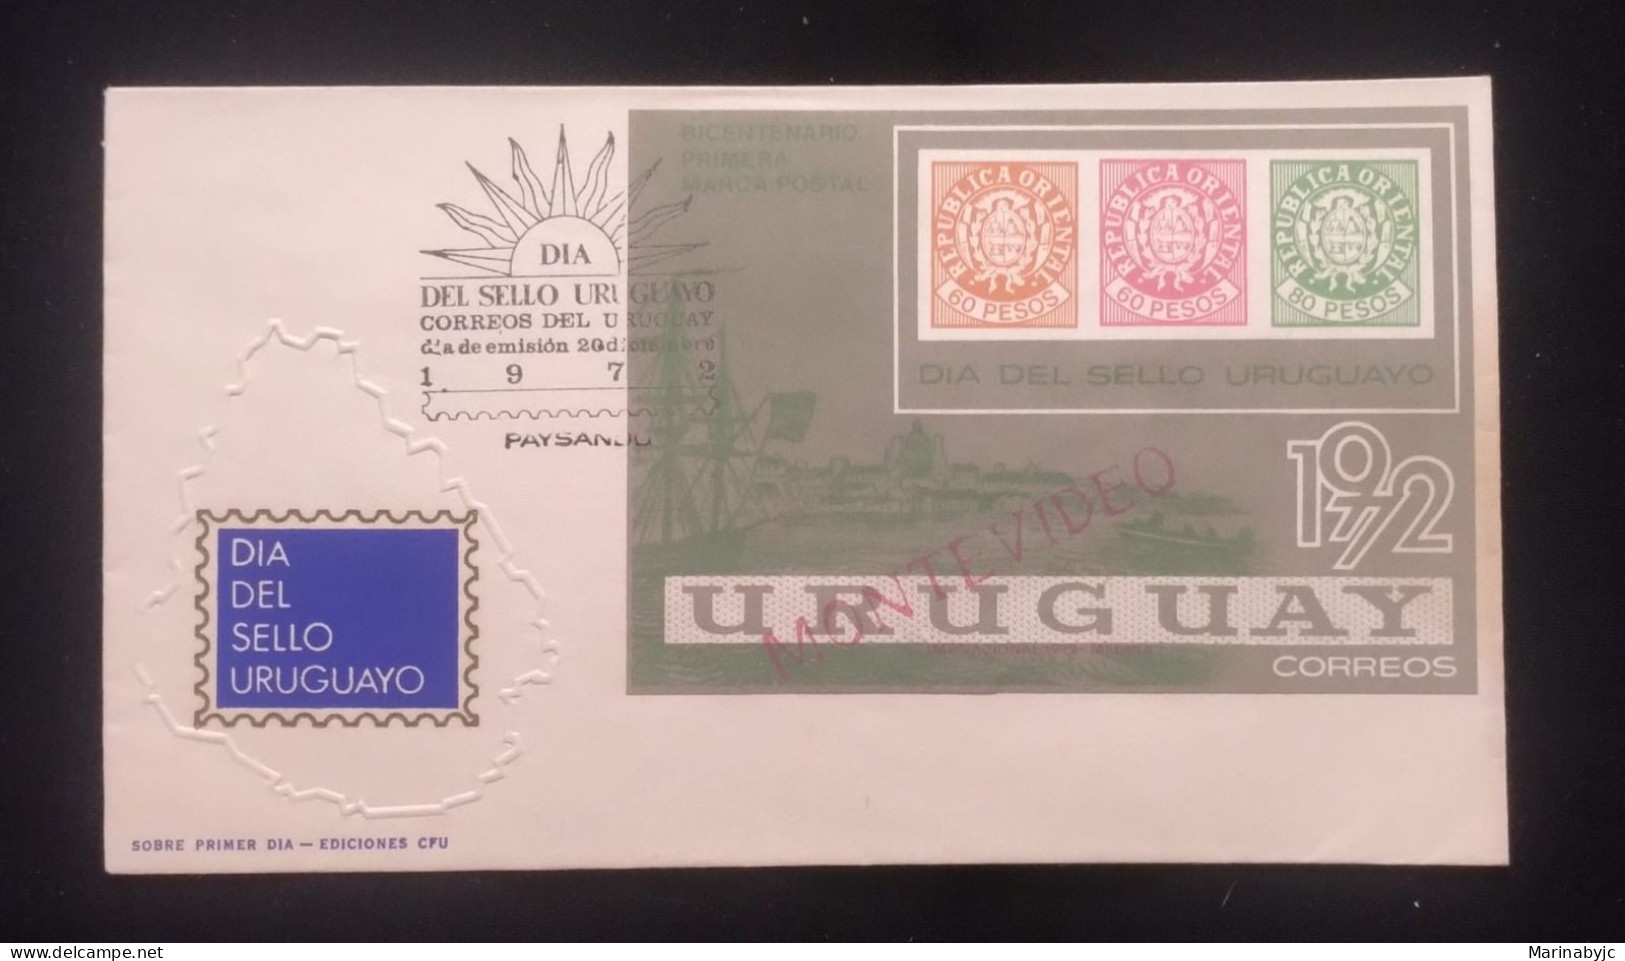 D)1972, URUGUAY, FIRST DAY COVER, ISSUE, DAY OF THE URUGUAYAN STAMP 72', FDC - Uruguay